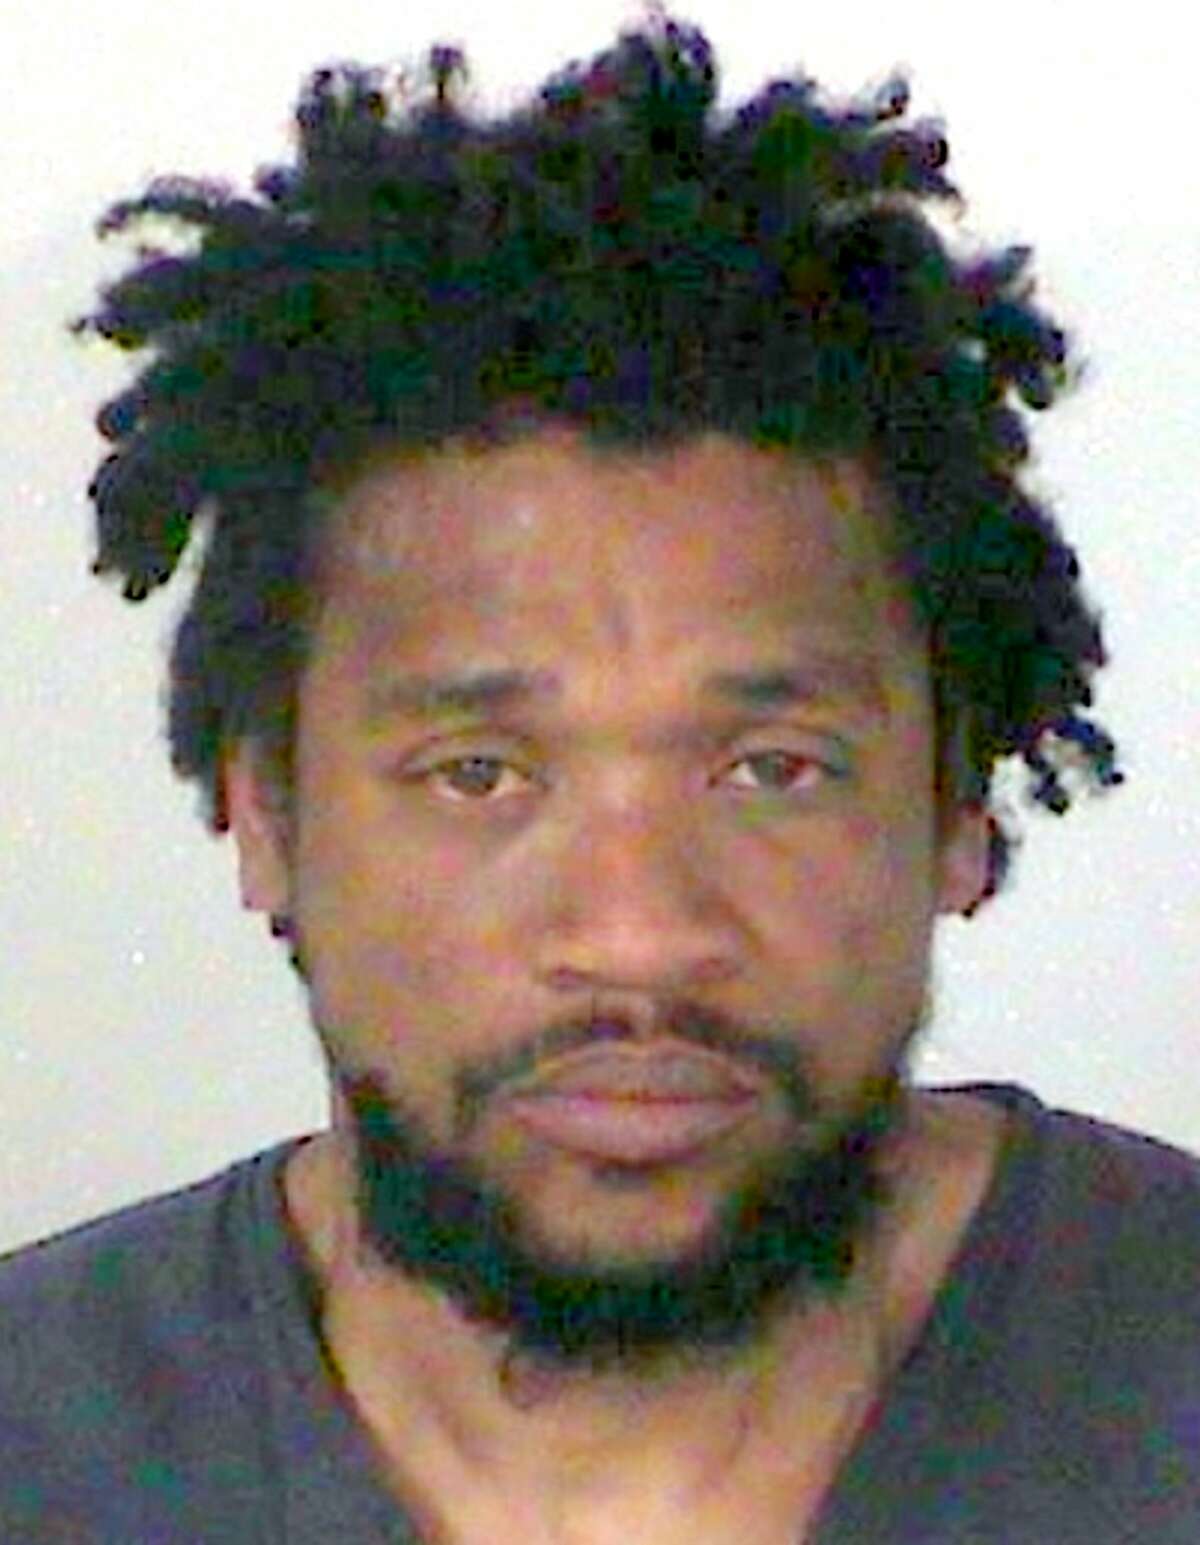 This undated booking photo from the Douglas County, Nev., Sheriff's Office shows Stefon Jefferson. Authorities have identified a man slain in Berkeley and confirmed their primary suspect is Jefferson, the same man accused of killing relatives in the San Francisco Bay Area before wounding an officer in Nevada, where he was arrested. The San Francisco Chronicle reports University of California Berkeley police officials said Monday, April 29, 2019 the man shot on Friday afternoon in Berkeley's People's Park was 43-year-old Calvin Kelley. Jefferson was charged Monday by prosecutors in Nevada's Douglas County with attempted murder of a police officer. (Douglas County Sheriff's Office via AP)